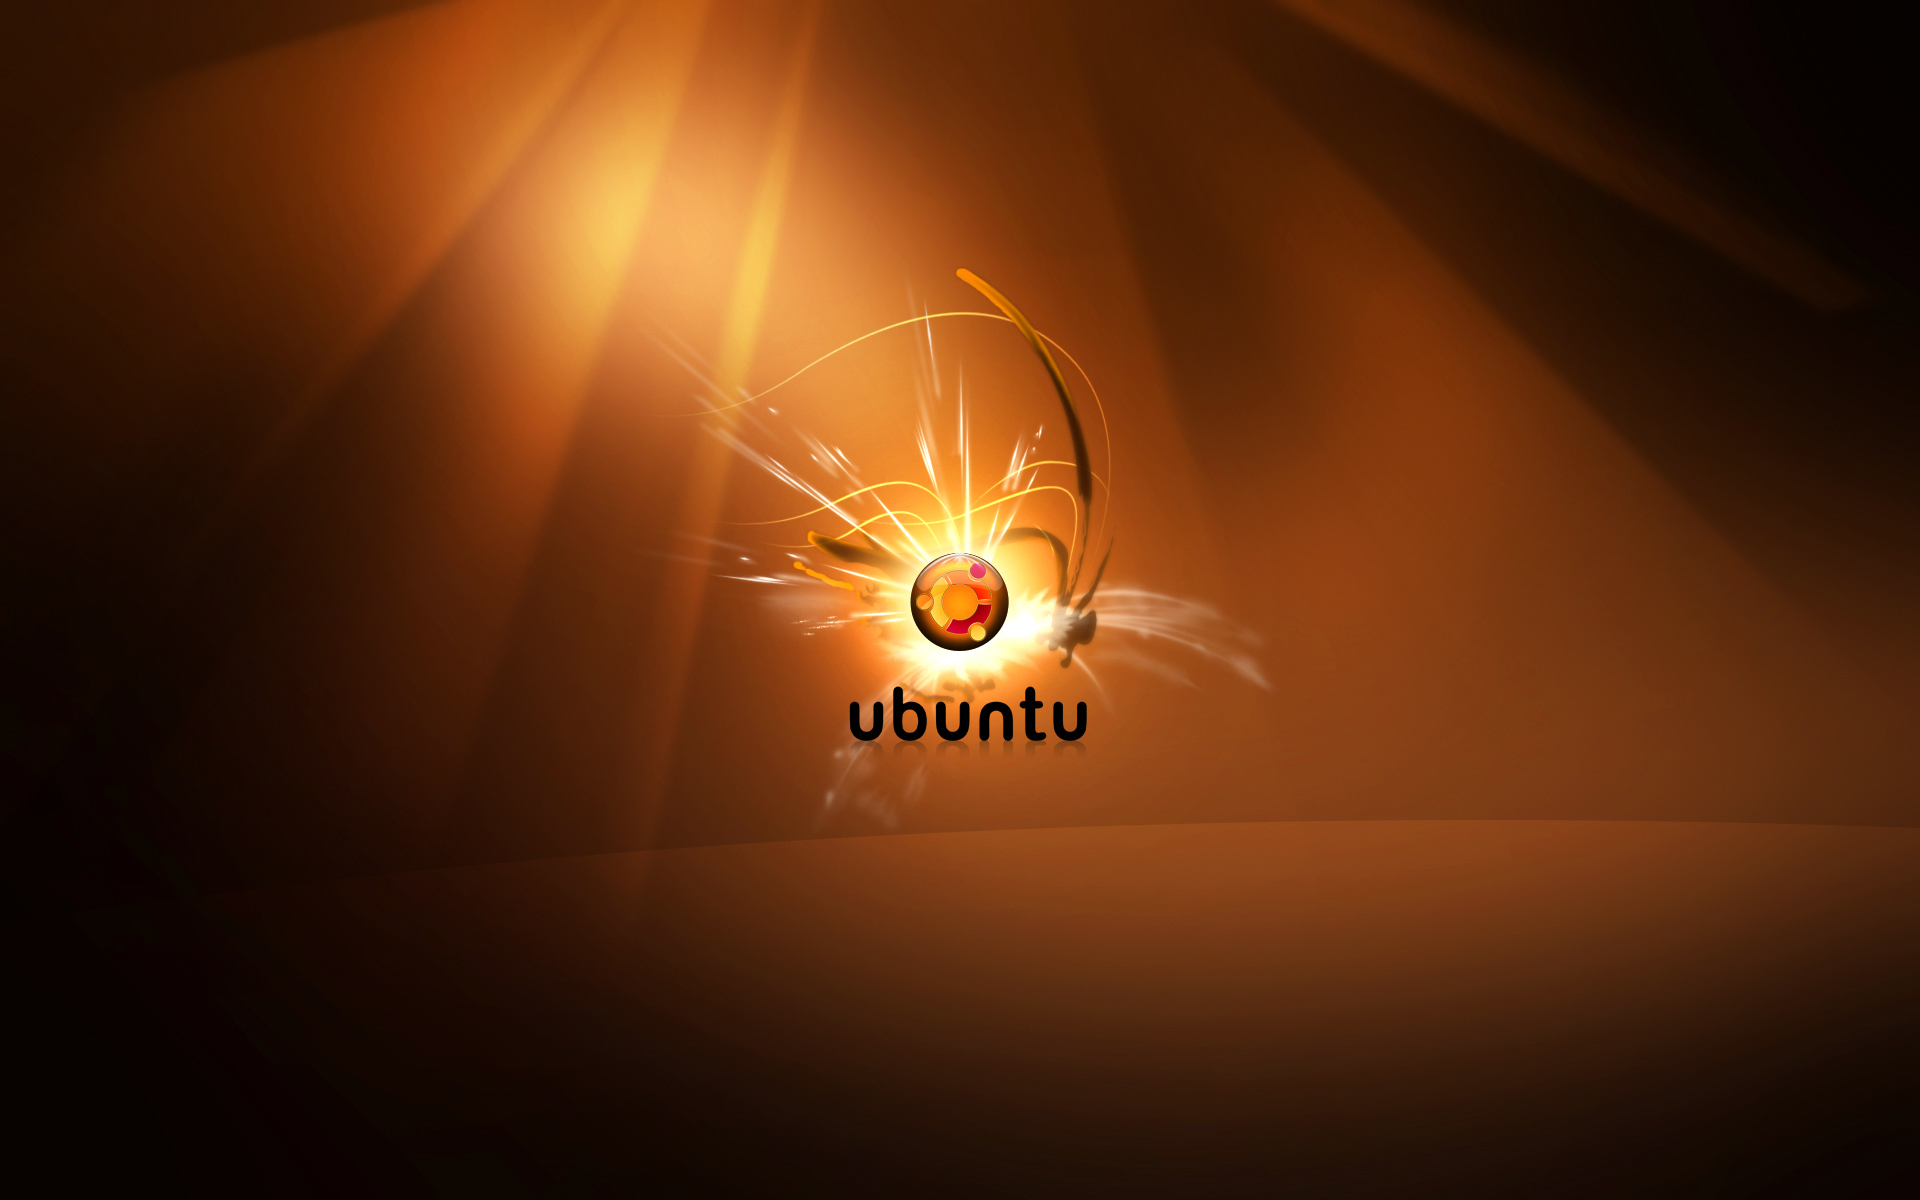 Ubuntu Wallpaper Release date Specs Review Redesign and Price